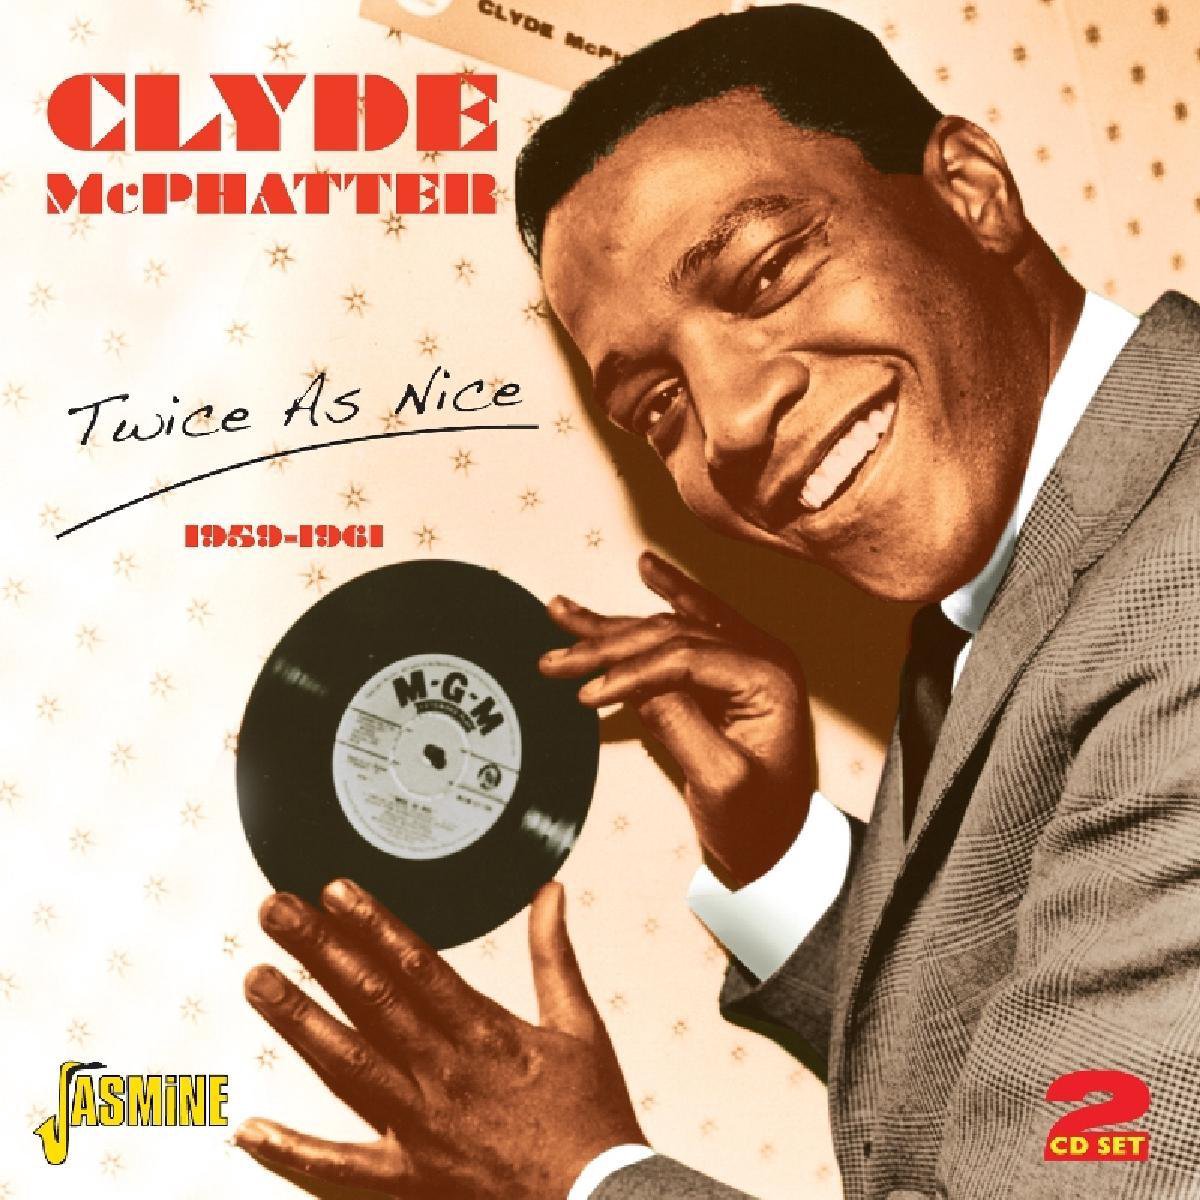 Twice As Nice 1959-1961 - Clyde Mcphatter